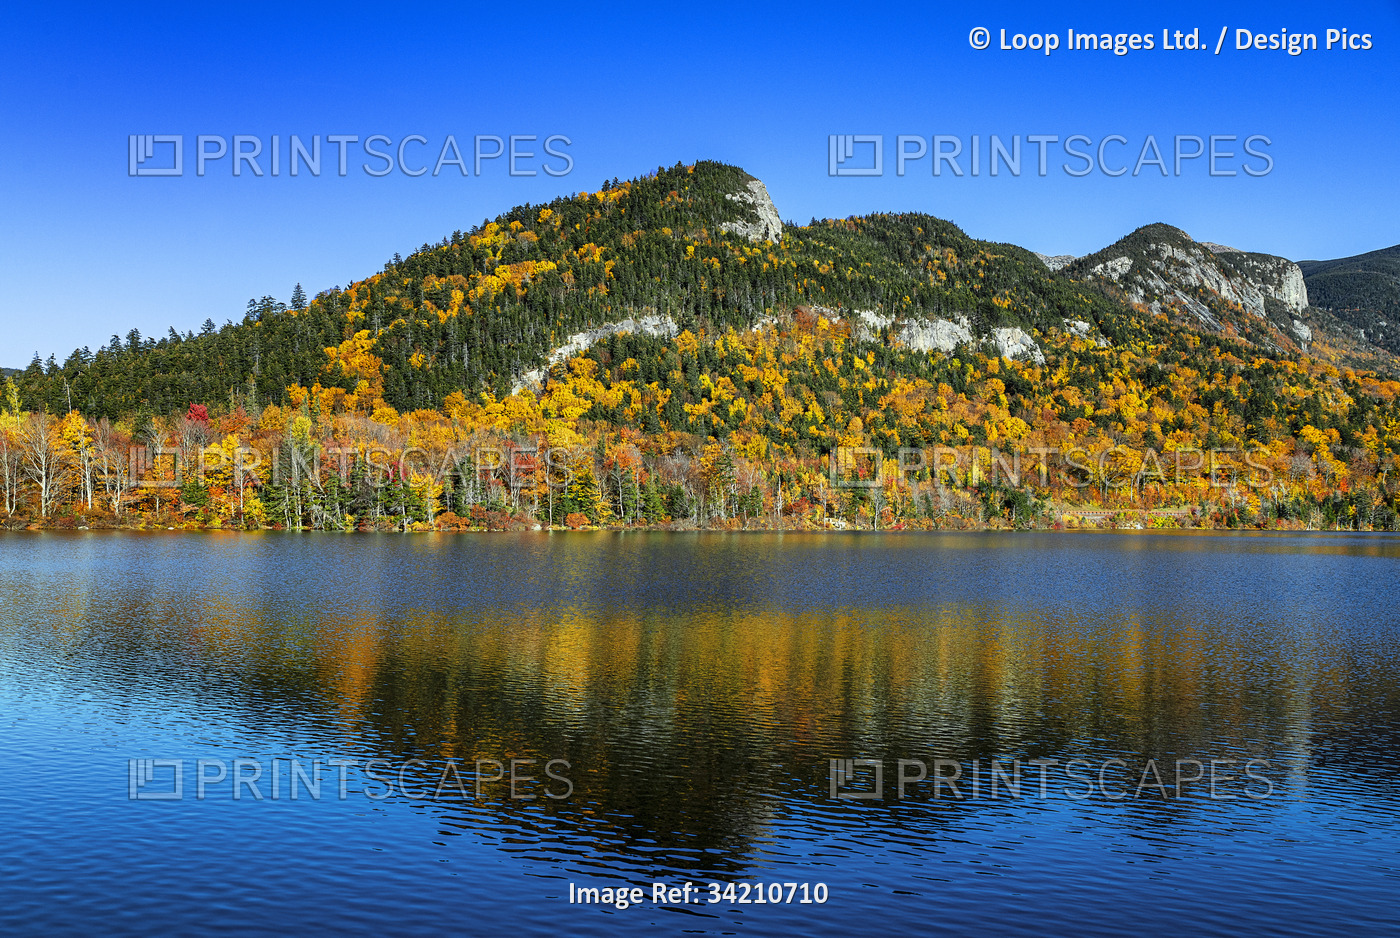 Autumn landscape at Echo Lake in Franconia Notch State Park in New Hampshire.